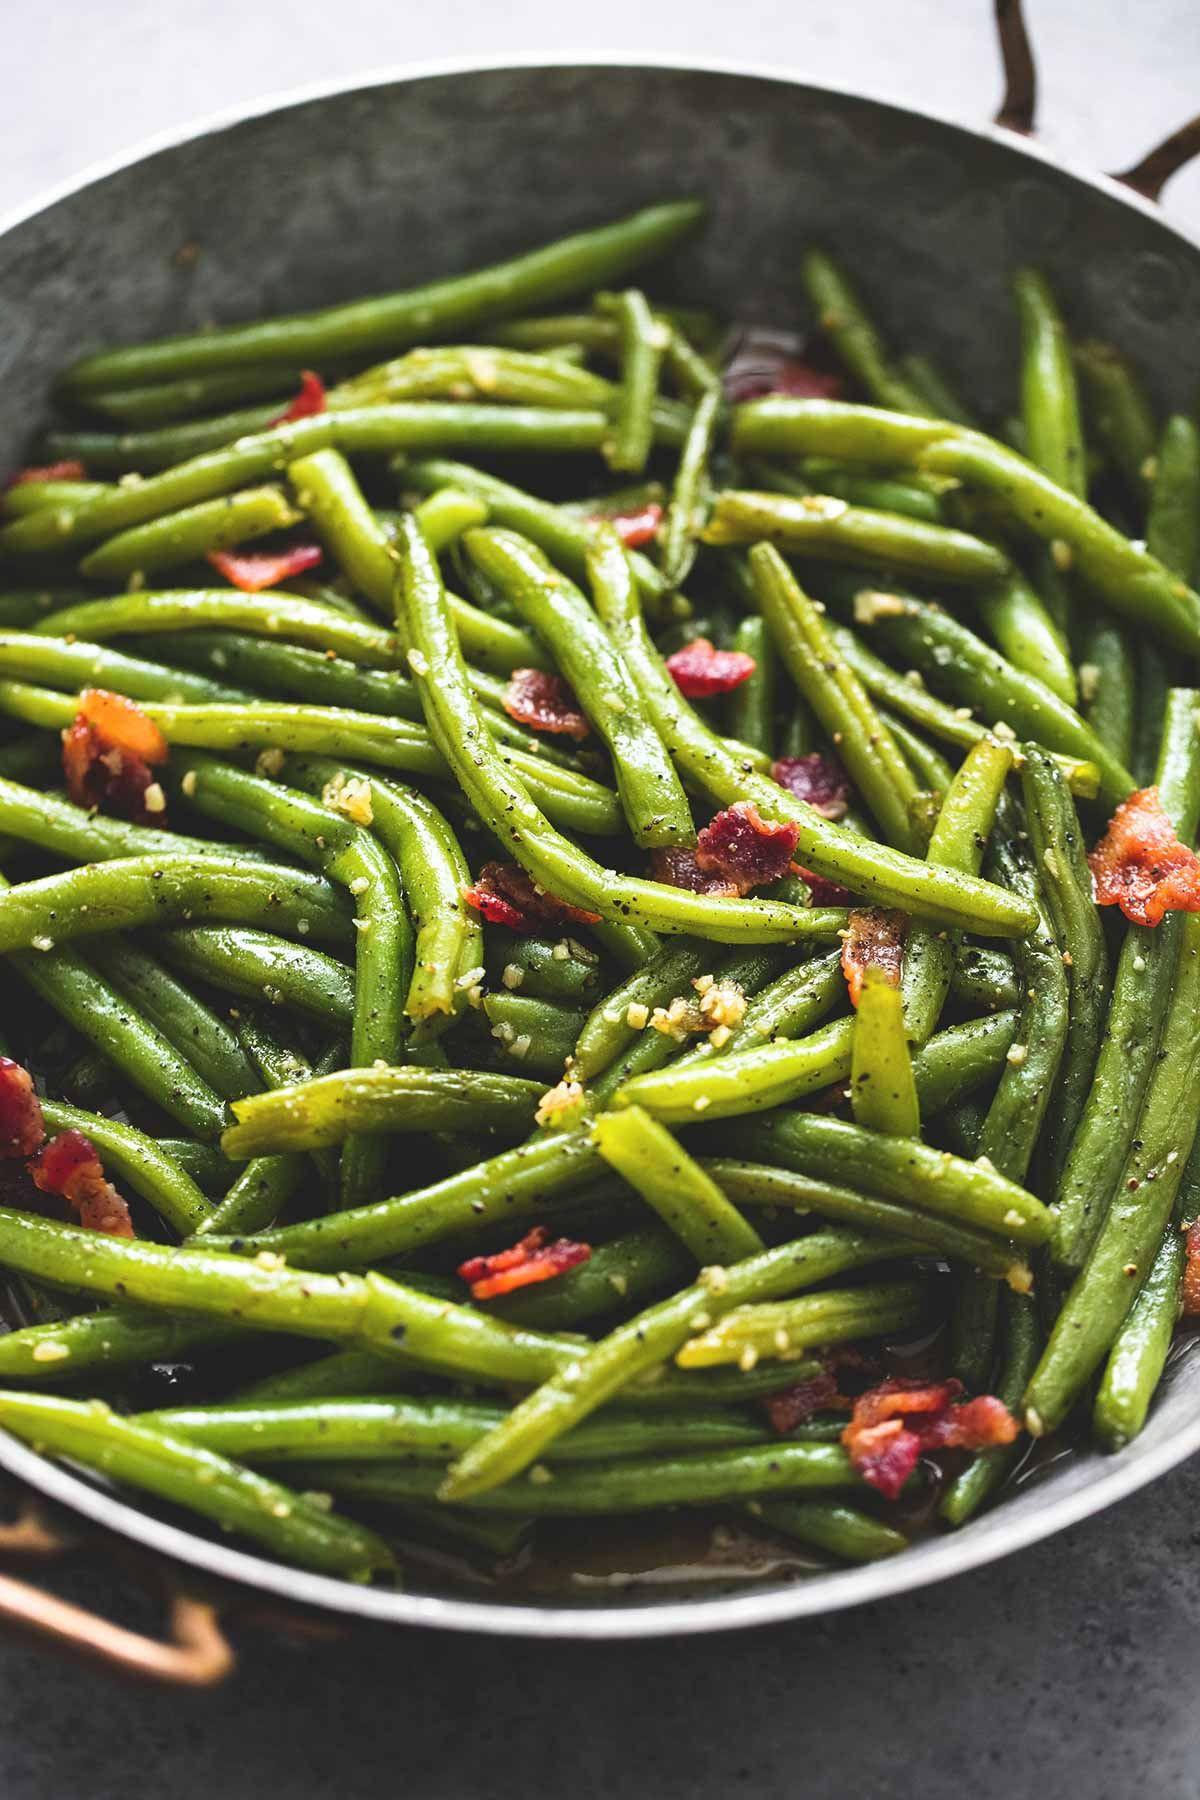 Green Bean Thanksgiving Recipe
 Easy Brown Sugar Green Beans with Bacon the perfect side